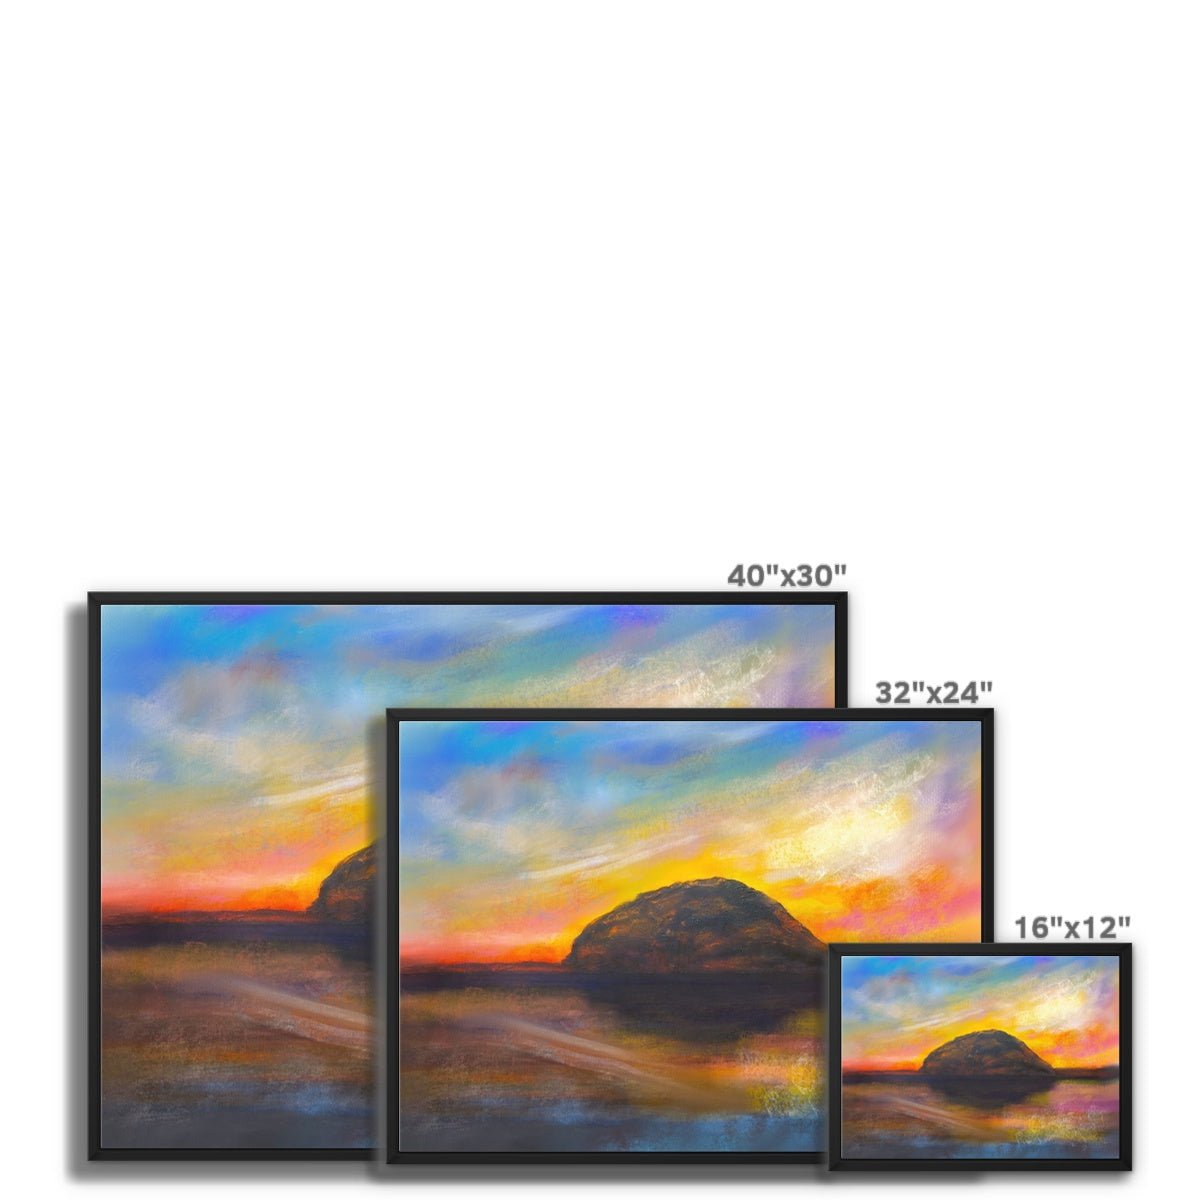 Ailsa Craig Dusk Painting | Framed Canvas From Scotland-Floating Framed Canvas Prints-Arran Art Gallery-Paintings, Prints, Homeware, Art Gifts From Scotland By Scottish Artist Kevin Hunter